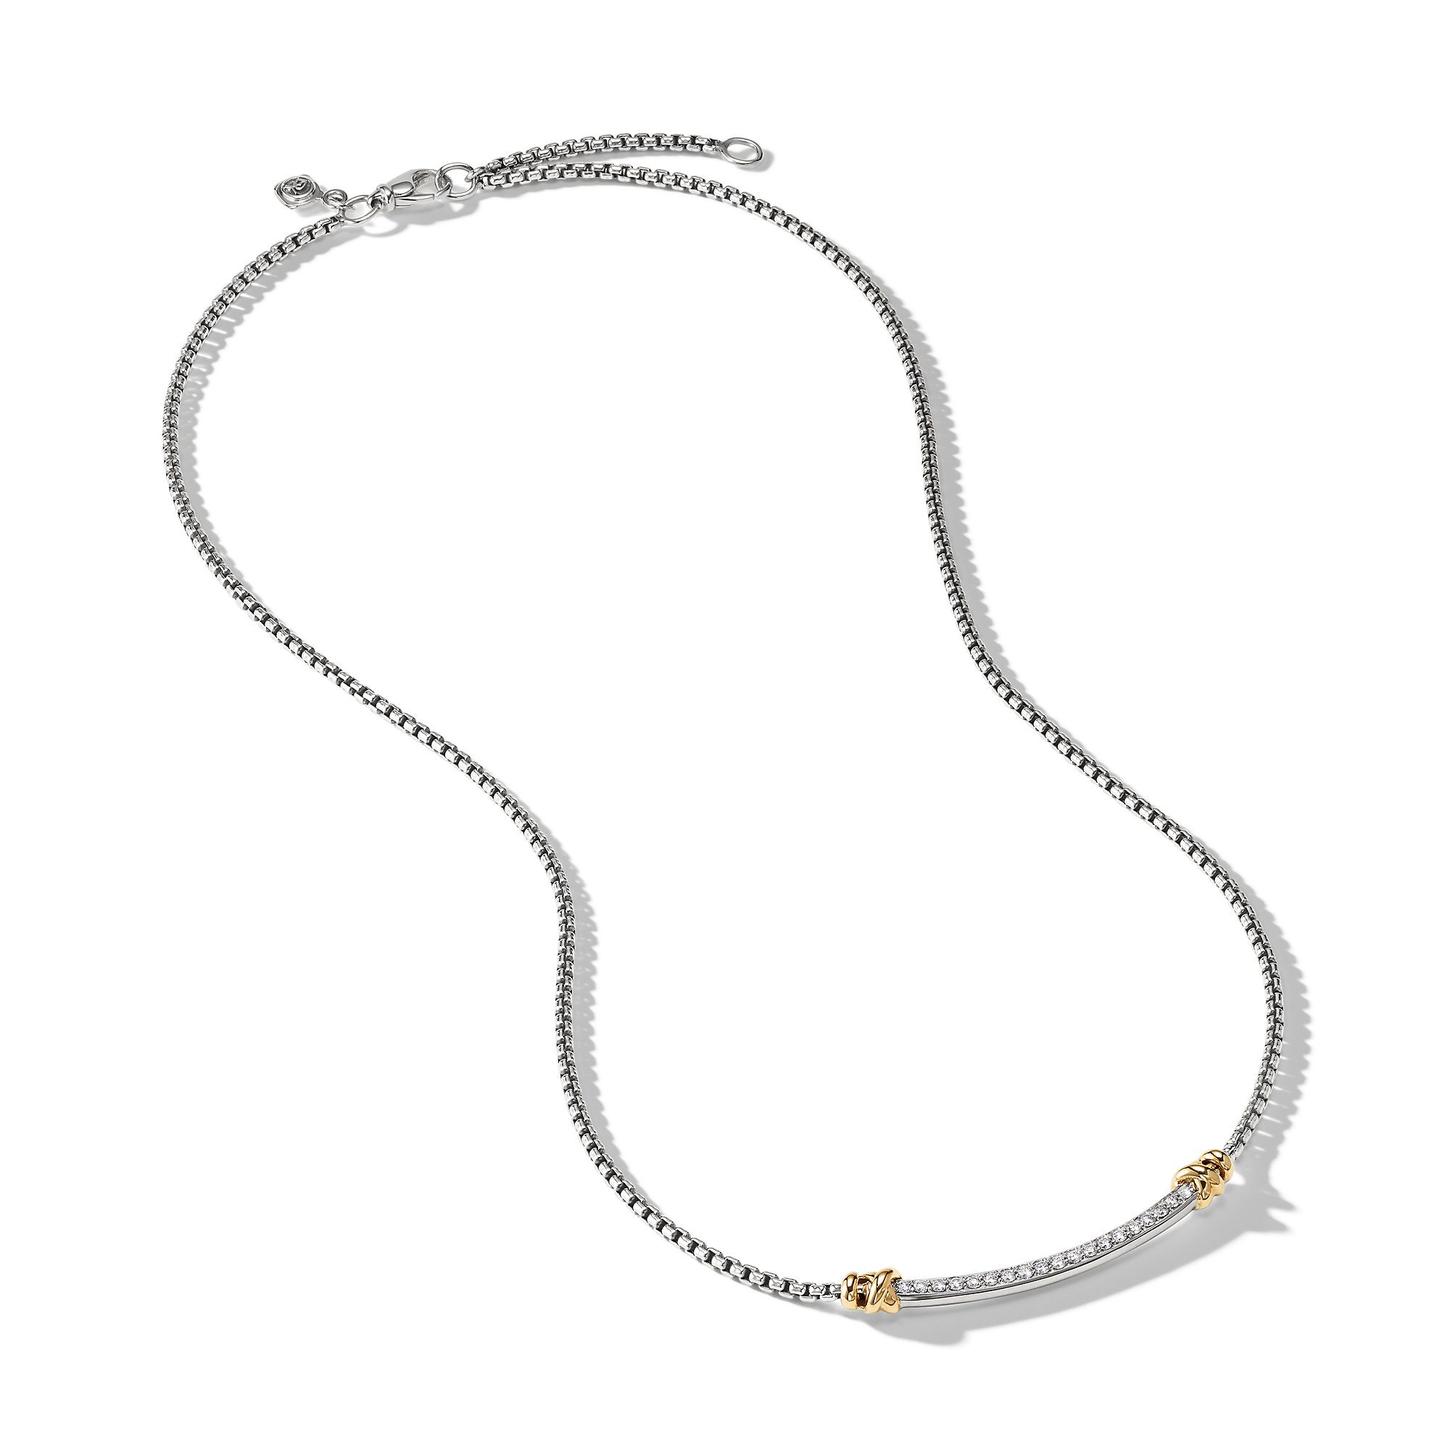 David Yurman | Petite Helena Station Necklace with 18K Yellow Gold and Diamonds | Open View